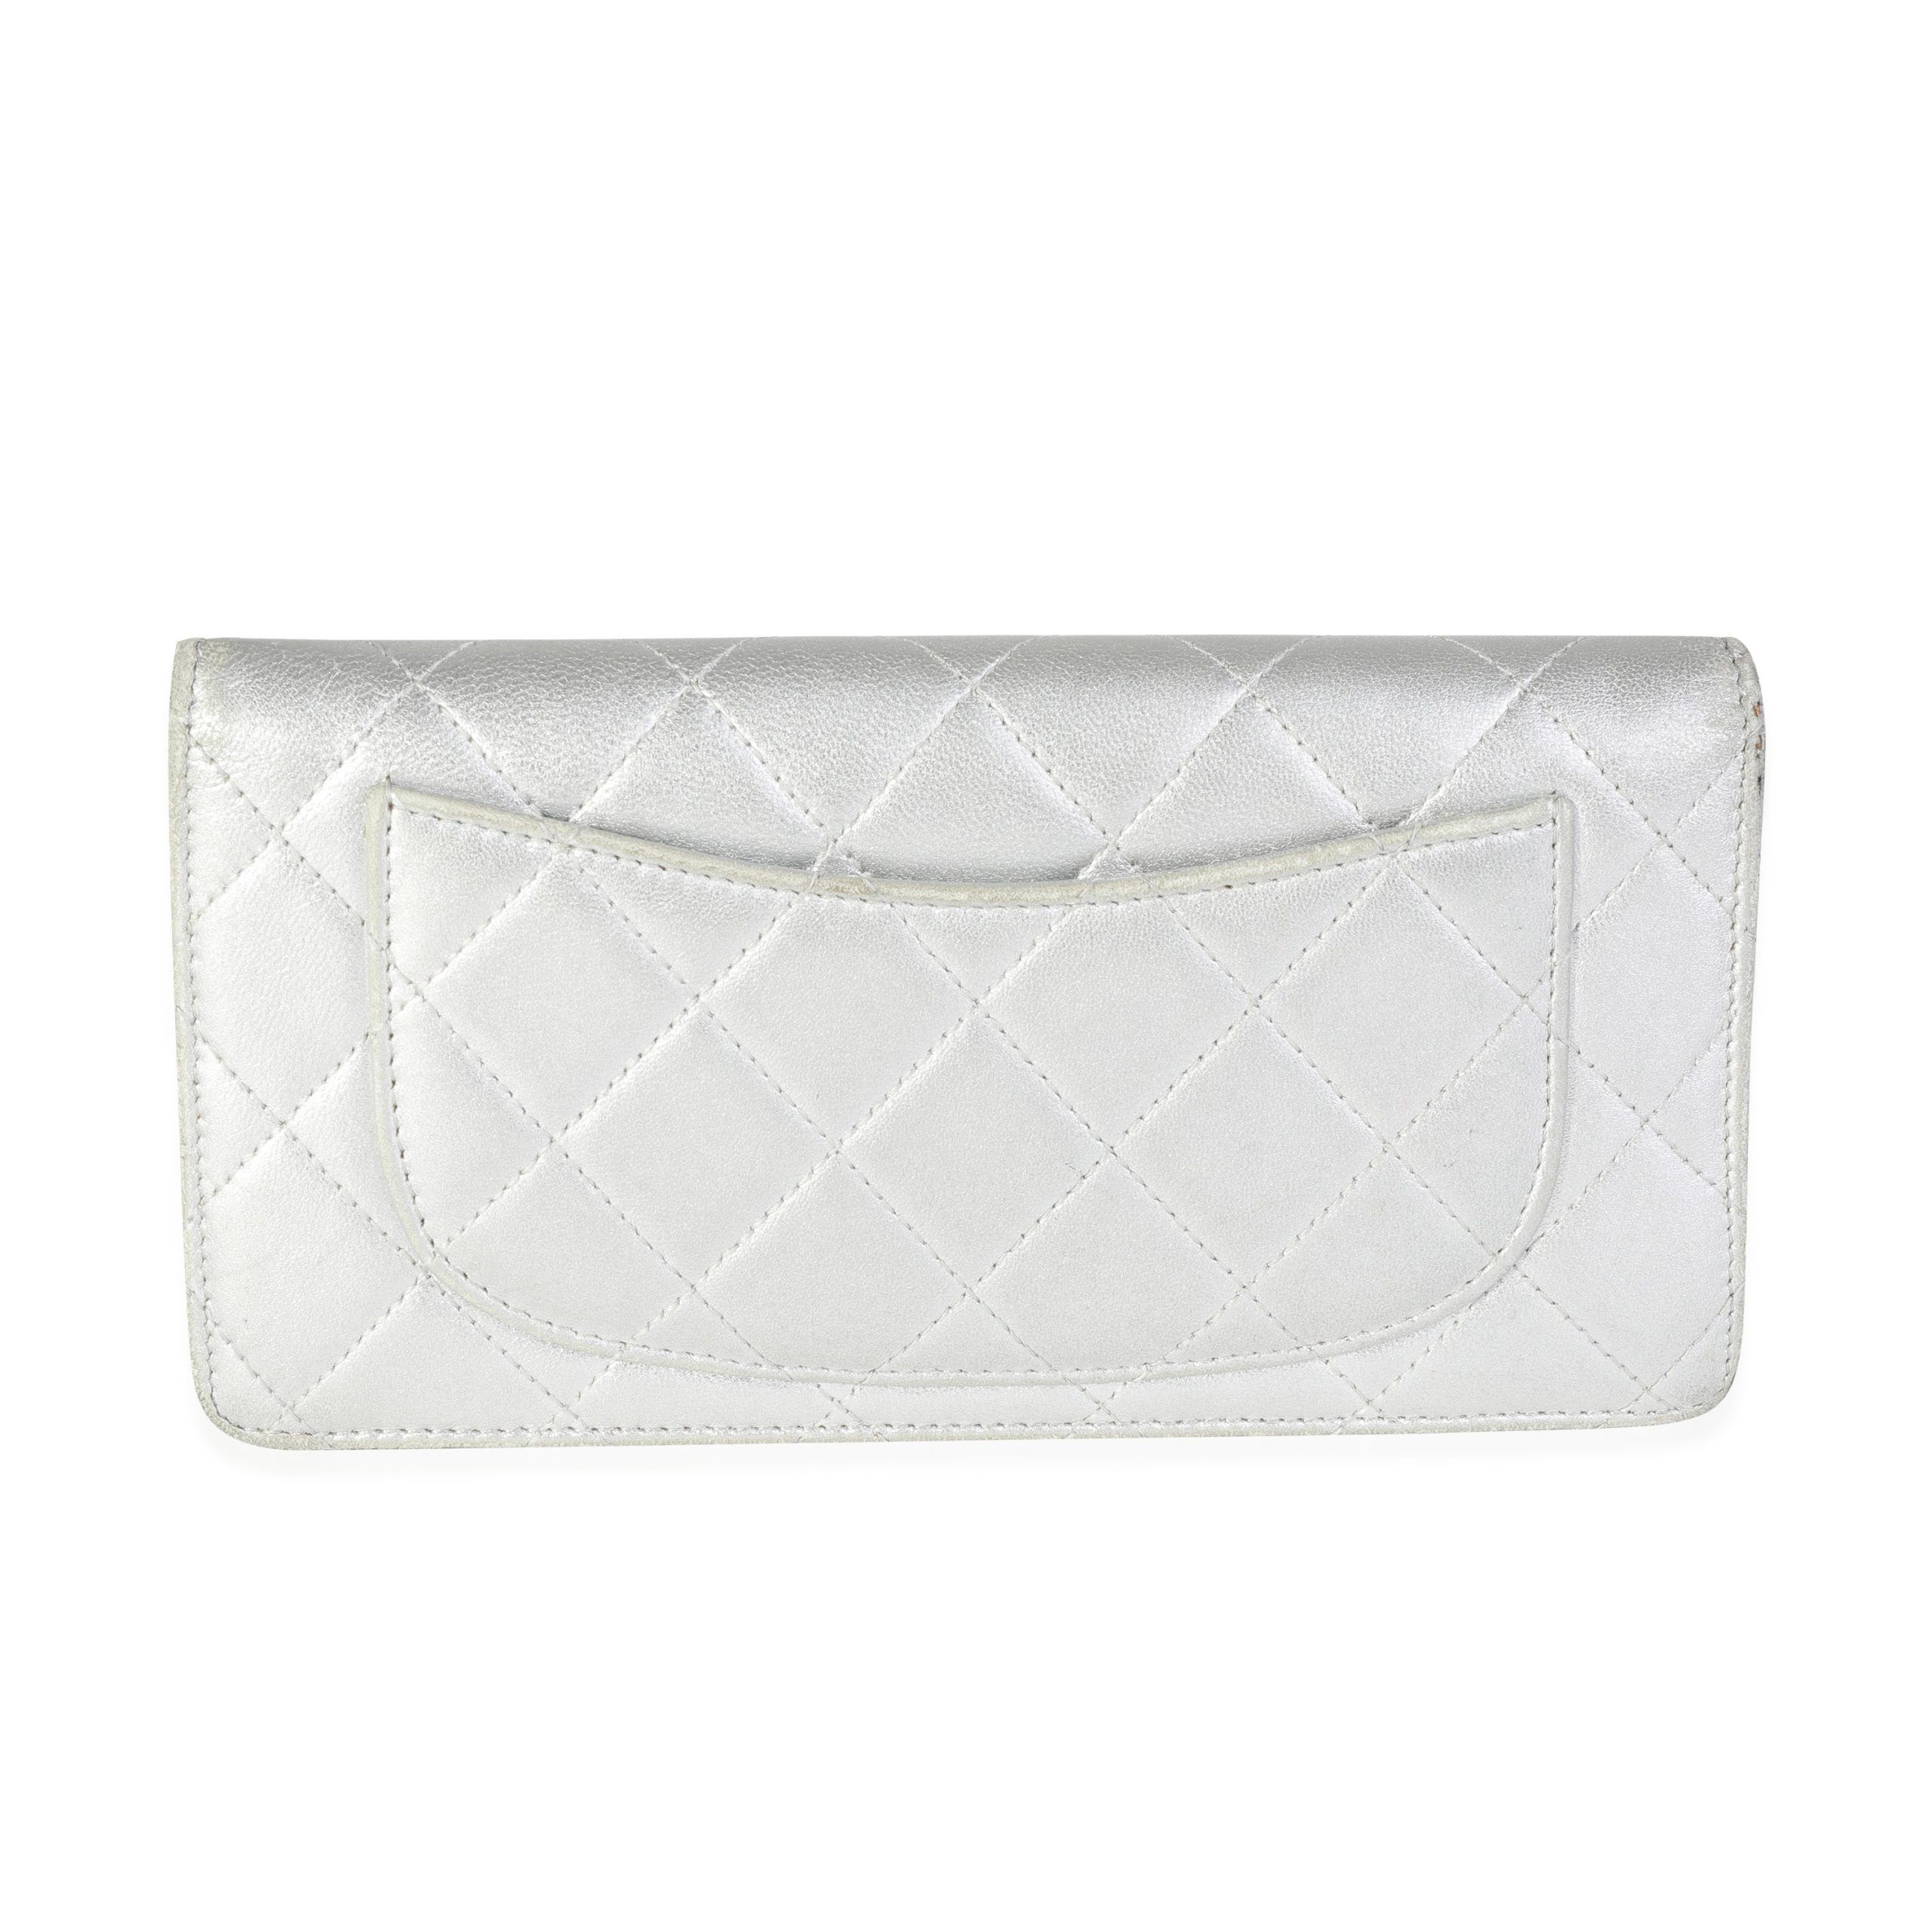 Chanel Chanel Metallic Silver Quilted Lambskin Leather CC L-Yen Wallet Size ONE SIZE - 7 Thumbnail